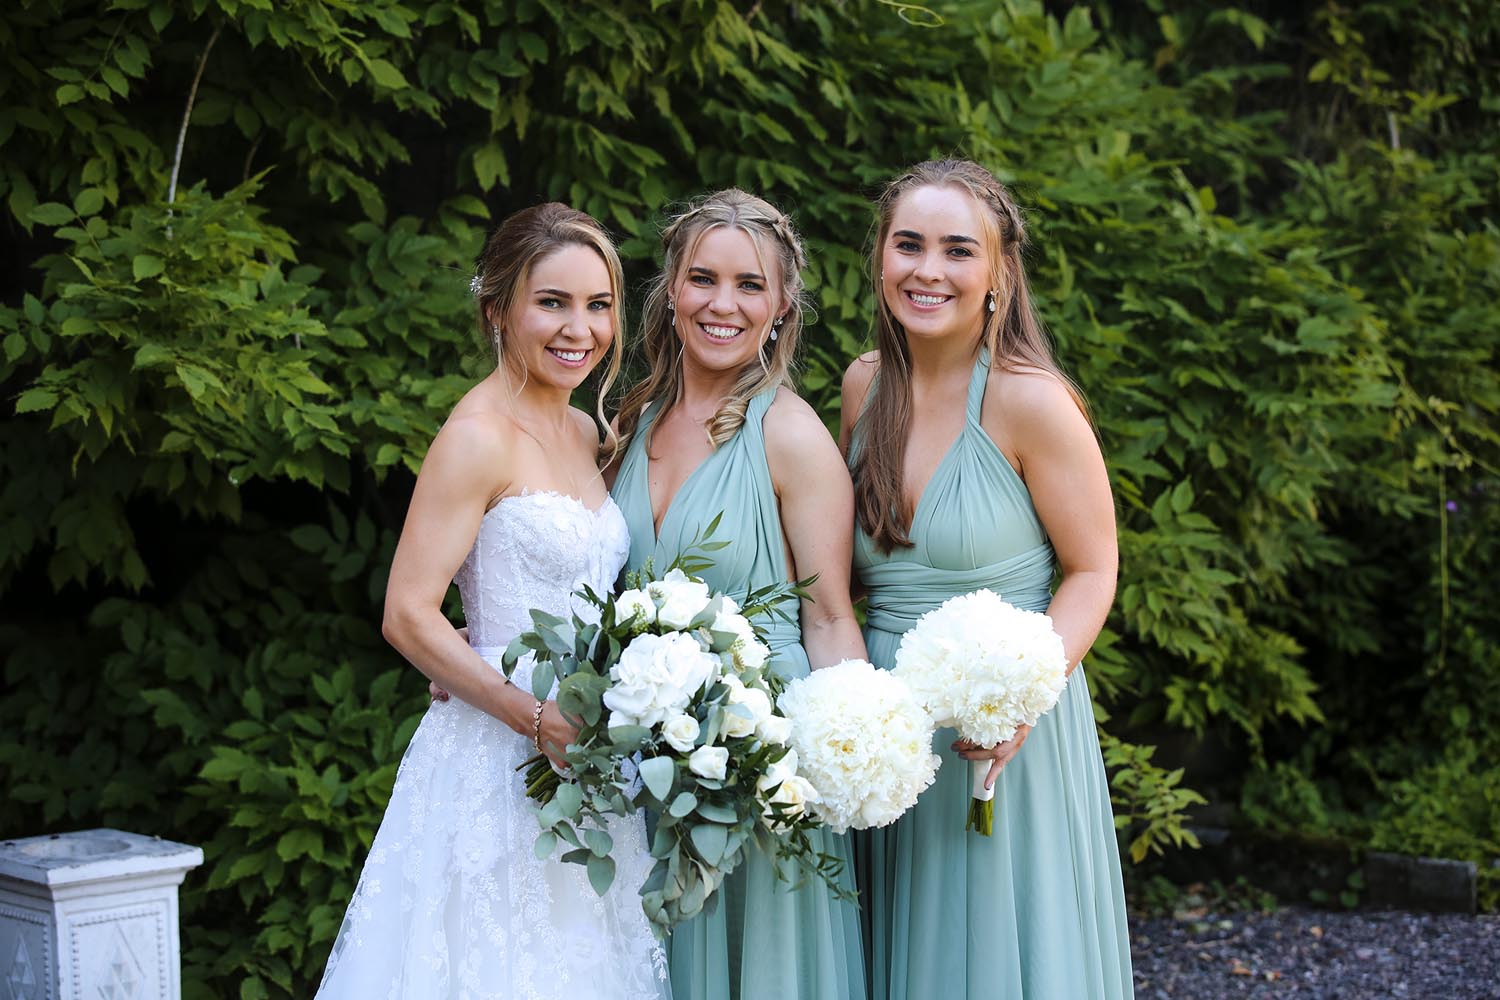 Bride with her and bridesmaids on her wedding day